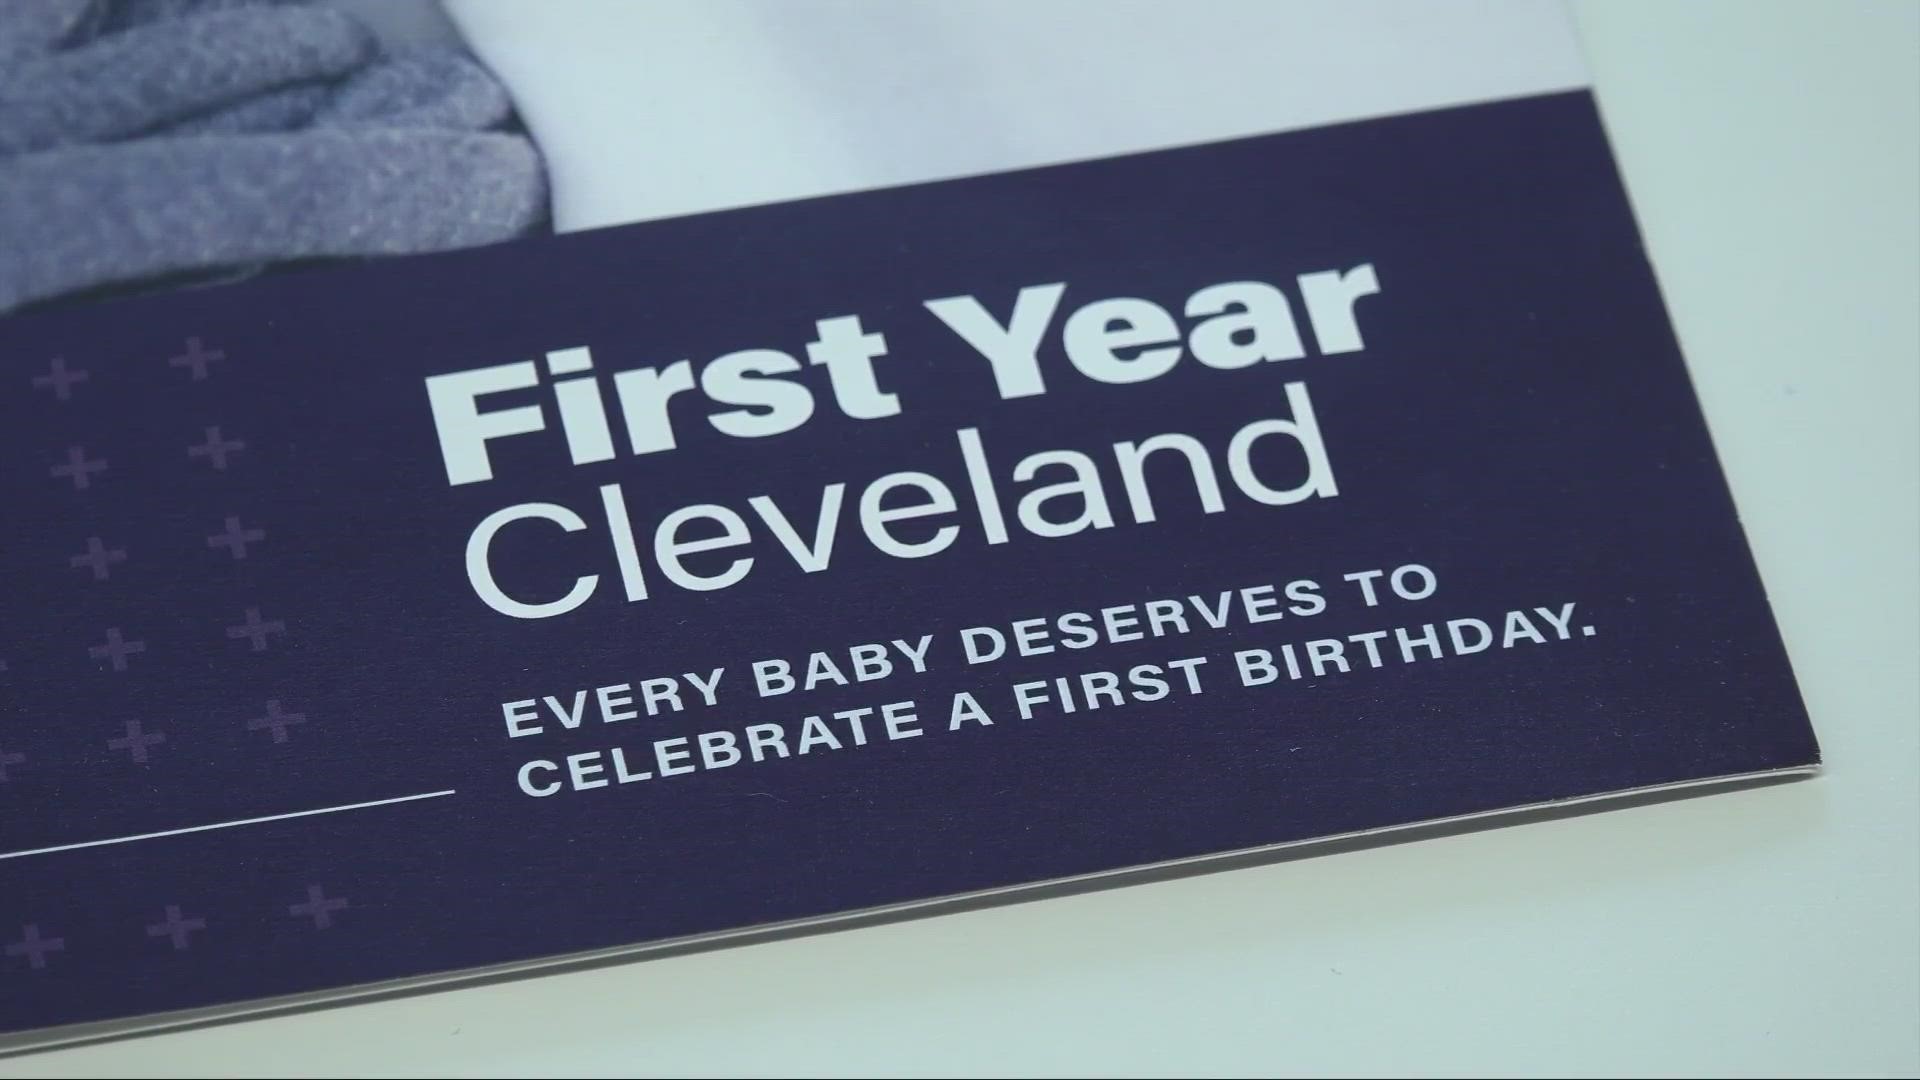 First Year Cleveland was formed in 2015 to help address Cuyahoga County’s concerning infant mortality rate.